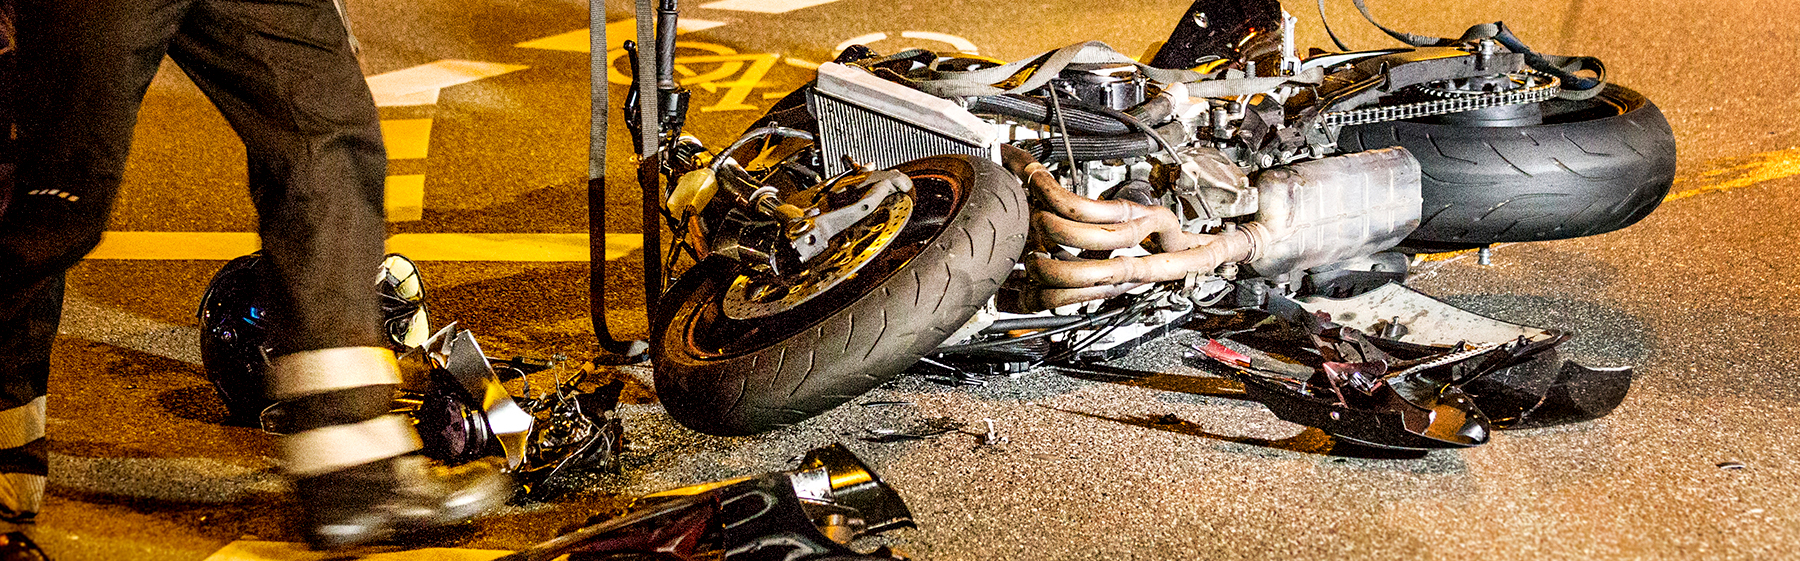 Motorcycle Injury Accidents And Defective Parts